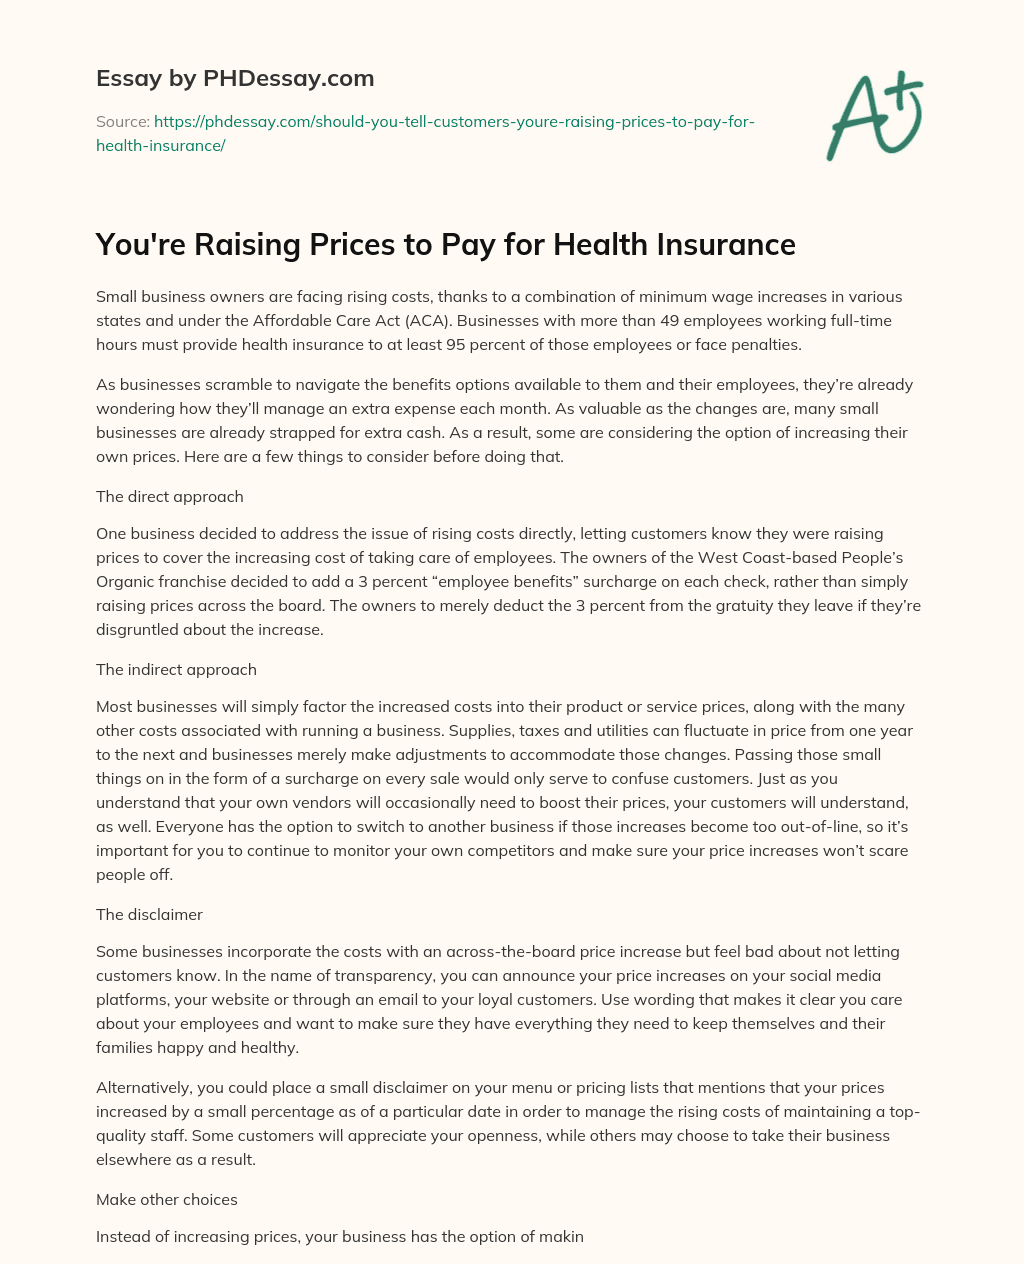 You’re Raising Prices to Pay for Health Insurance essay